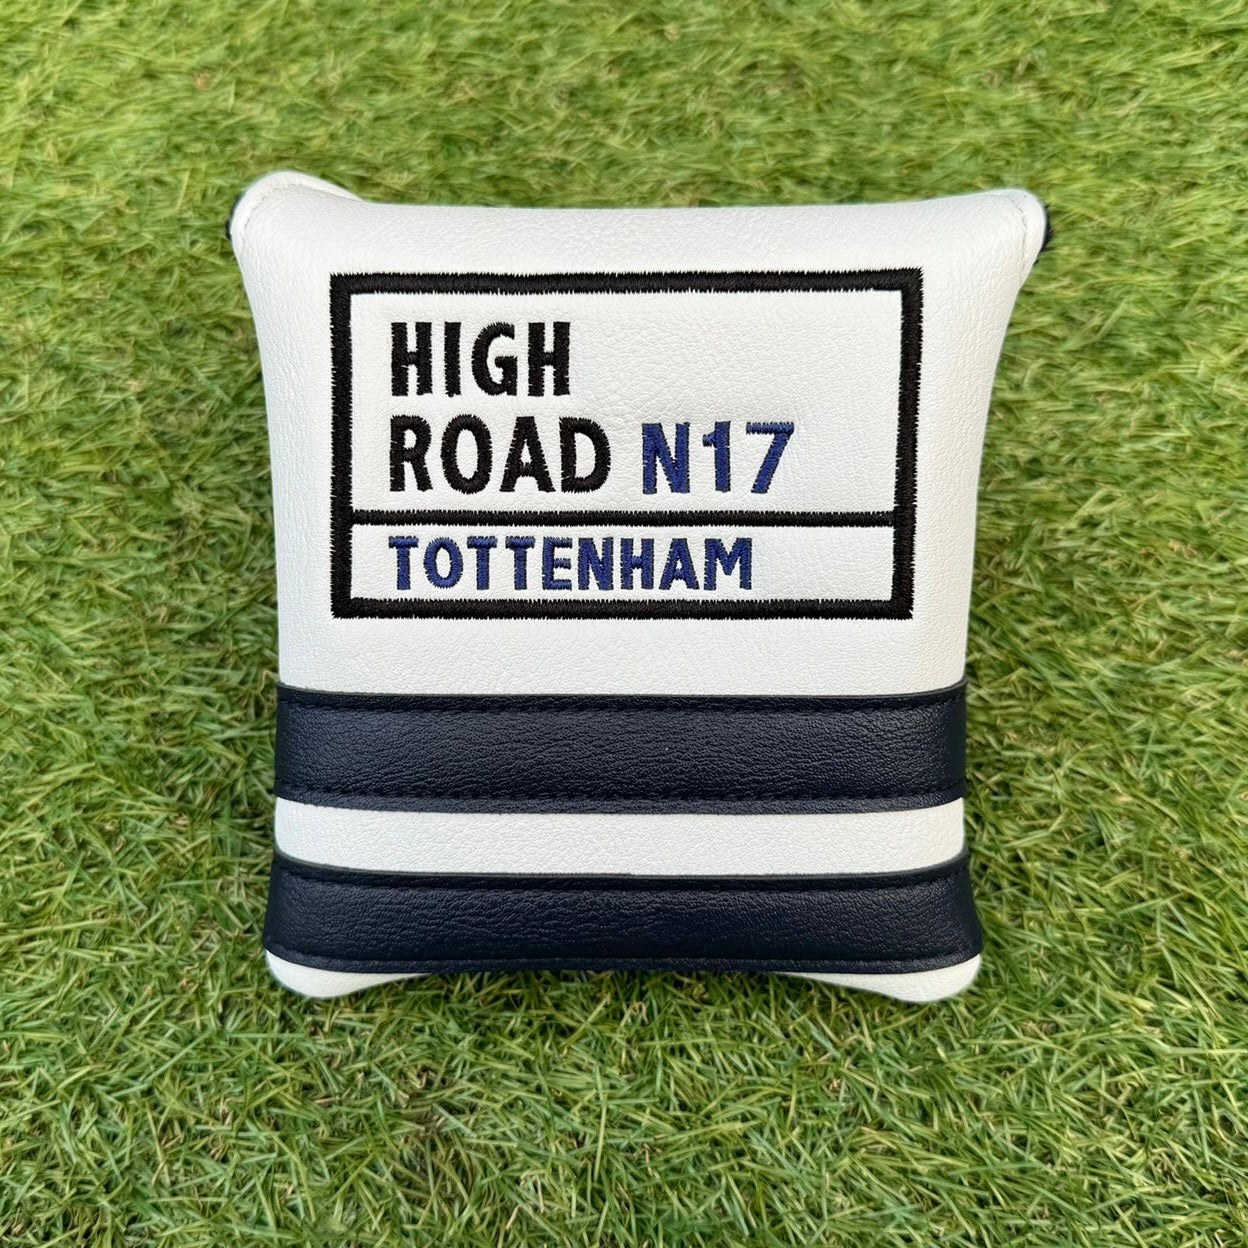 Spurs Golf Covers